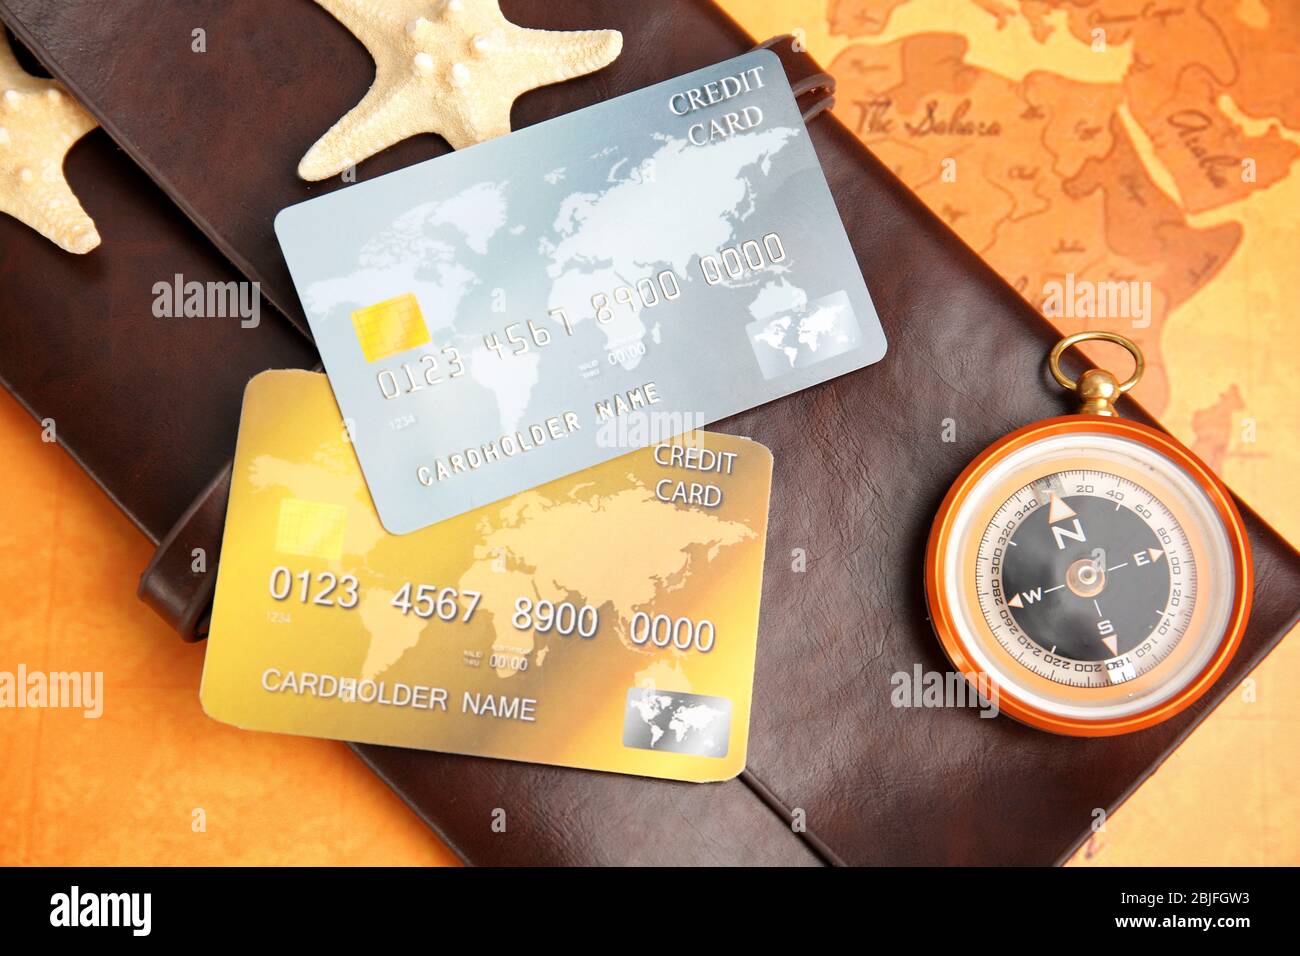 Credit cards with wallet on world map background Stock Photo